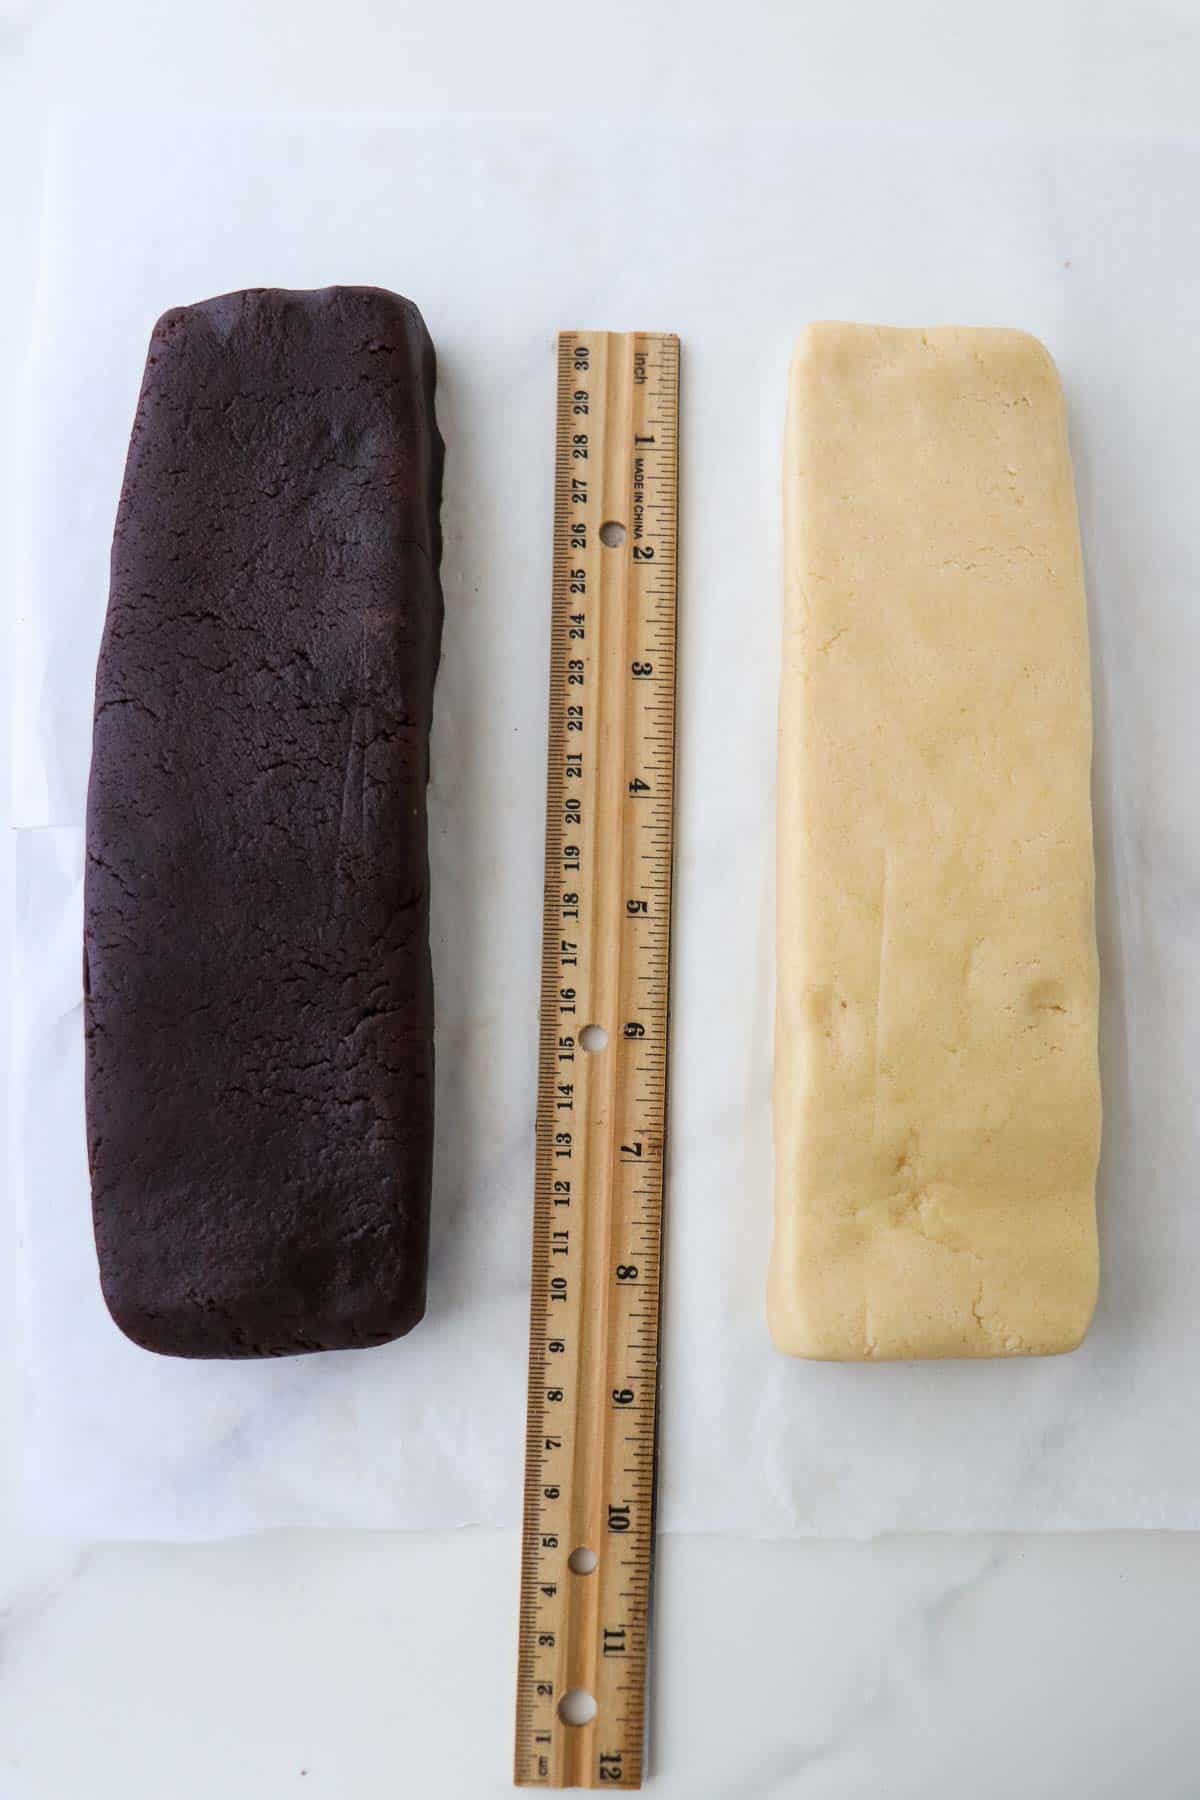 Two rectangles of cookie dough, one chocolate and one vanilla with a ruler in between them.